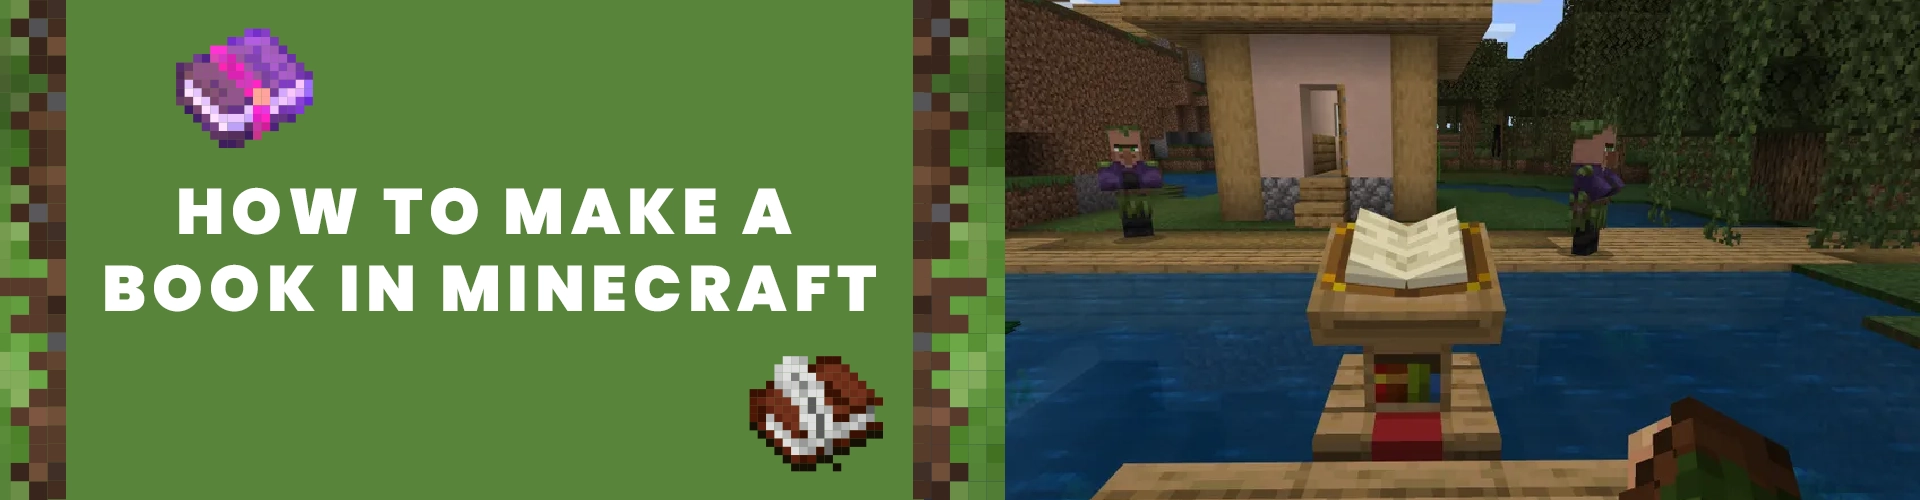 How to Make a Book in Minecraft